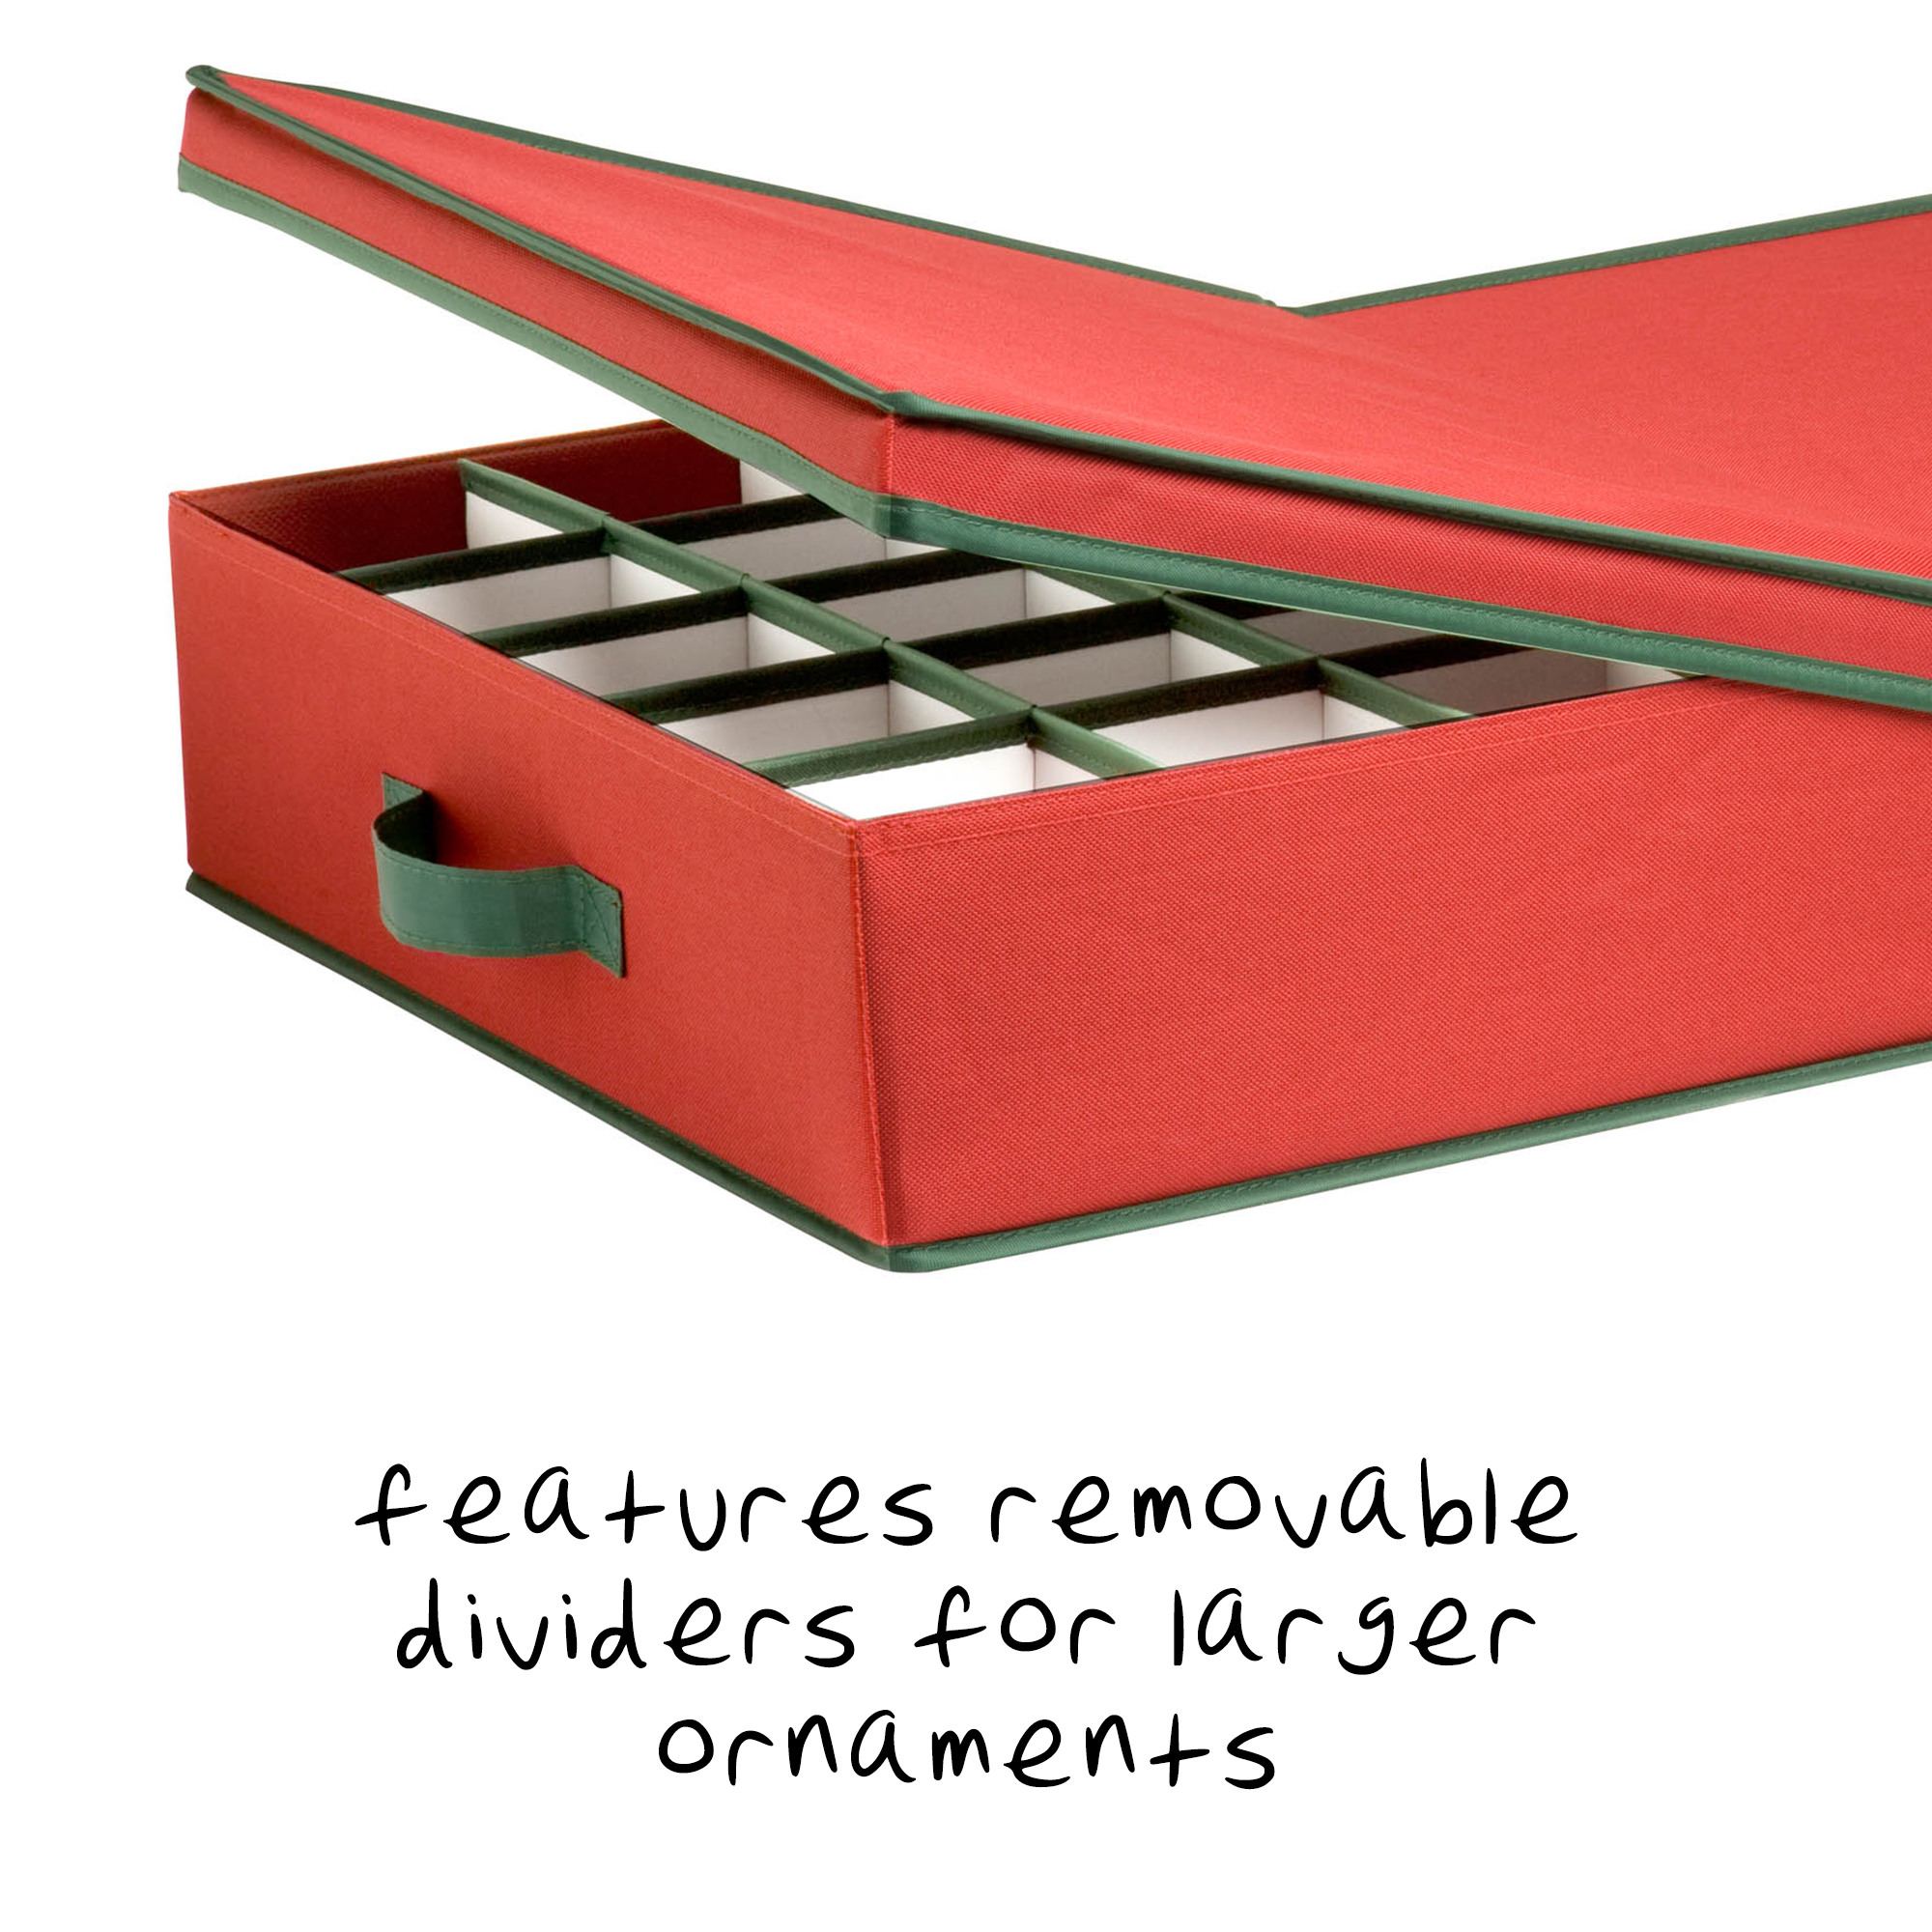 Honey-Can-Do Polyester 40-Compartment Holiday Ornament Storage Box, Red - image 5 of 6